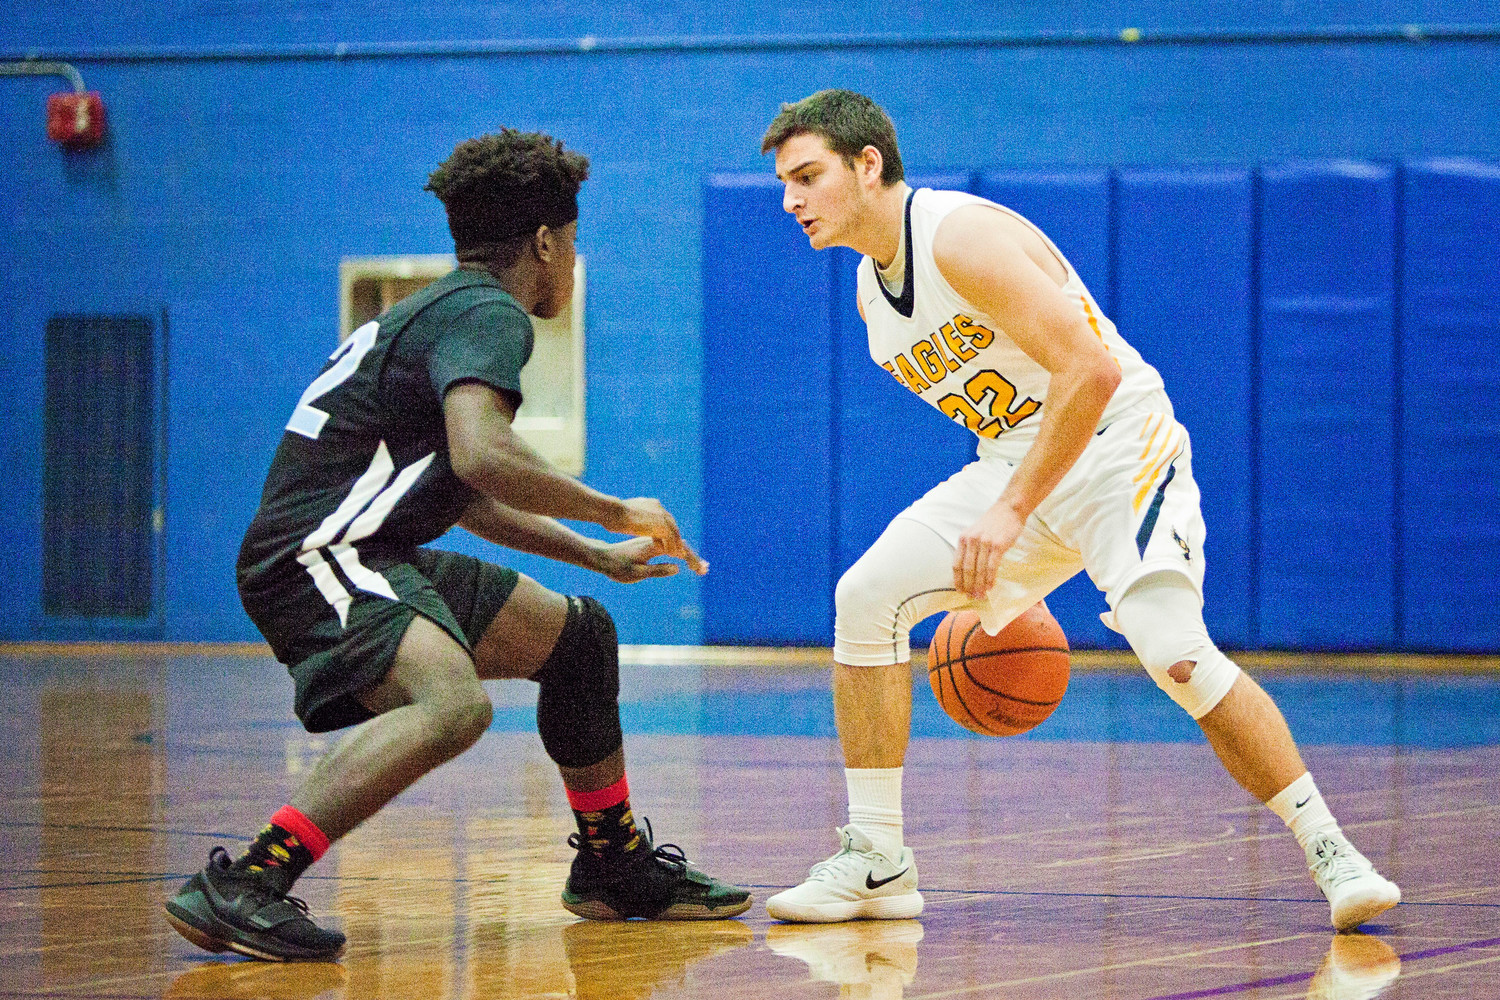 Barrington's Reid Nolan looks to drive past a Holy Name player.